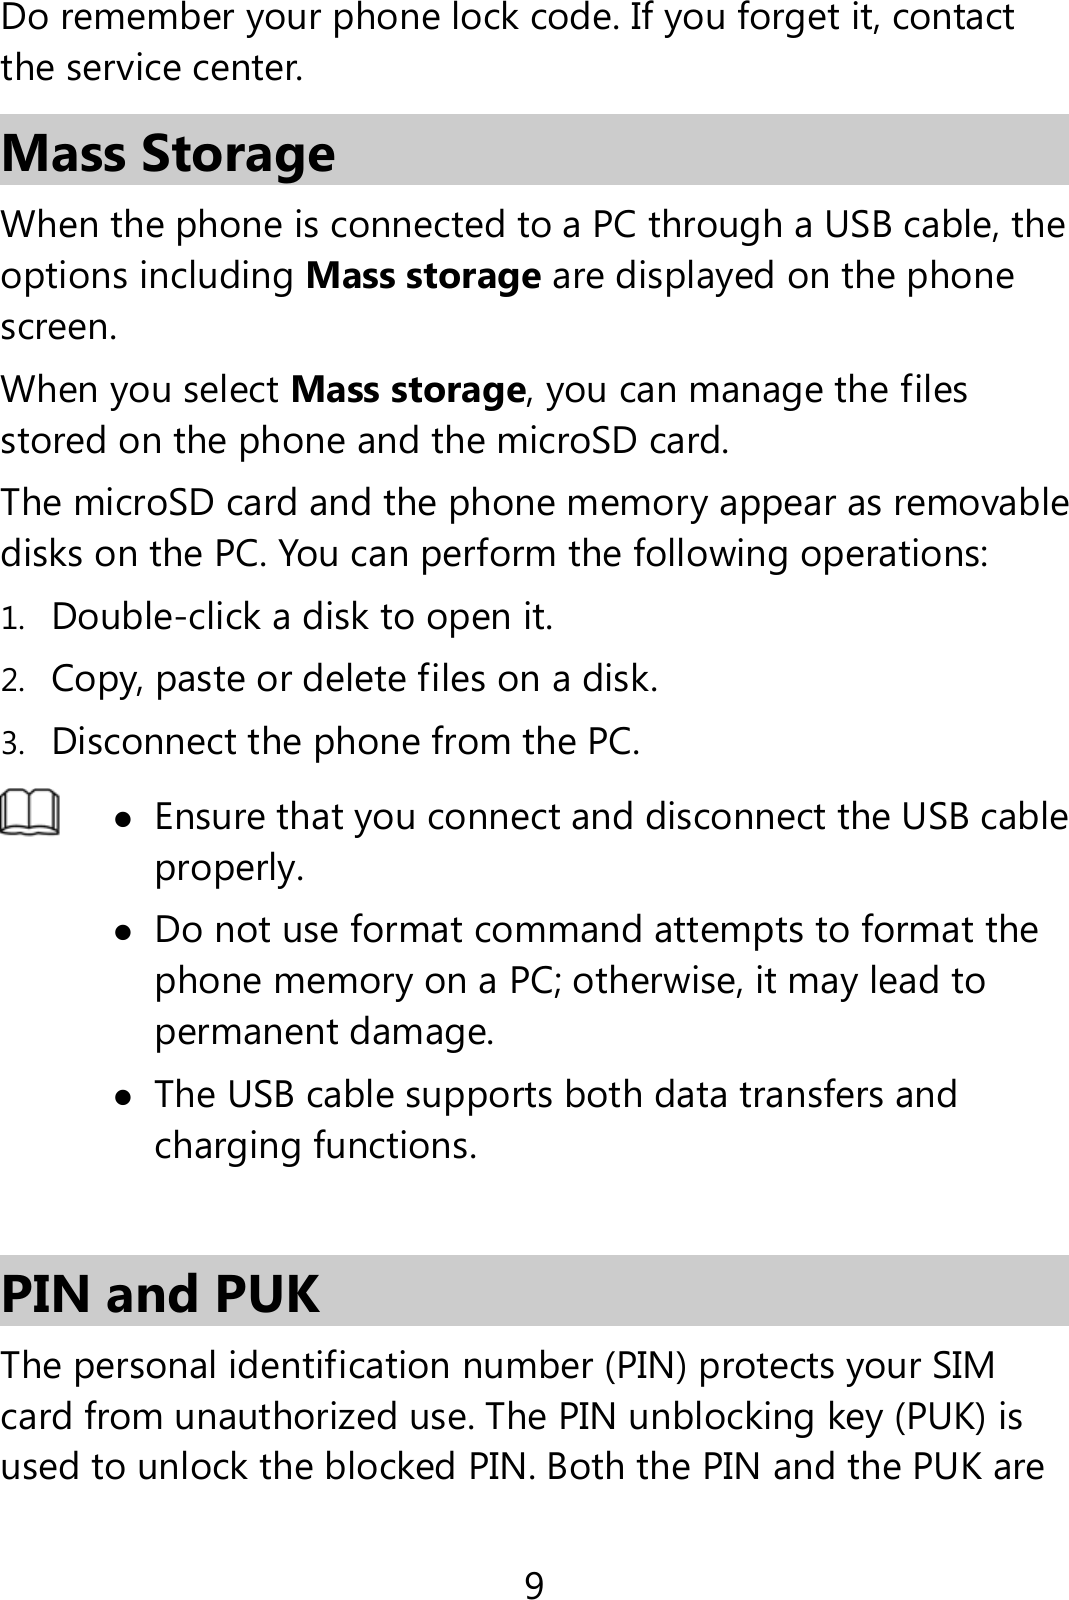 9 Do remember your phone lock code. If you forget it, contact the service center. Mass Storage When the phone is connected to a PC through a USB cable, the options including Mass storage are displayed on the phone screen. When you select Mass storage, you can manage the files stored on the phone and the microSD card. The microSD card and the phone memory appear as removable disks on the PC. You can perform the following operations: 1. Double-click a disk to open it. 2. Copy, paste or delete files on a disk. 3. Disconnect the phone from the PC.   Ensure that you connect and disconnect the USB cable properly.  Do not use format command attempts to format the phone memory on a PC; otherwise, it may lead to permanent damage.  The USB cable supports both data transfers and charging functions.  PIN and PUK   The personal identification number (PIN) protects your SIM card from unauthorized use. The PIN unblocking key (PUK) is used to unlock the blocked PIN. Both the PIN and the PUK are 